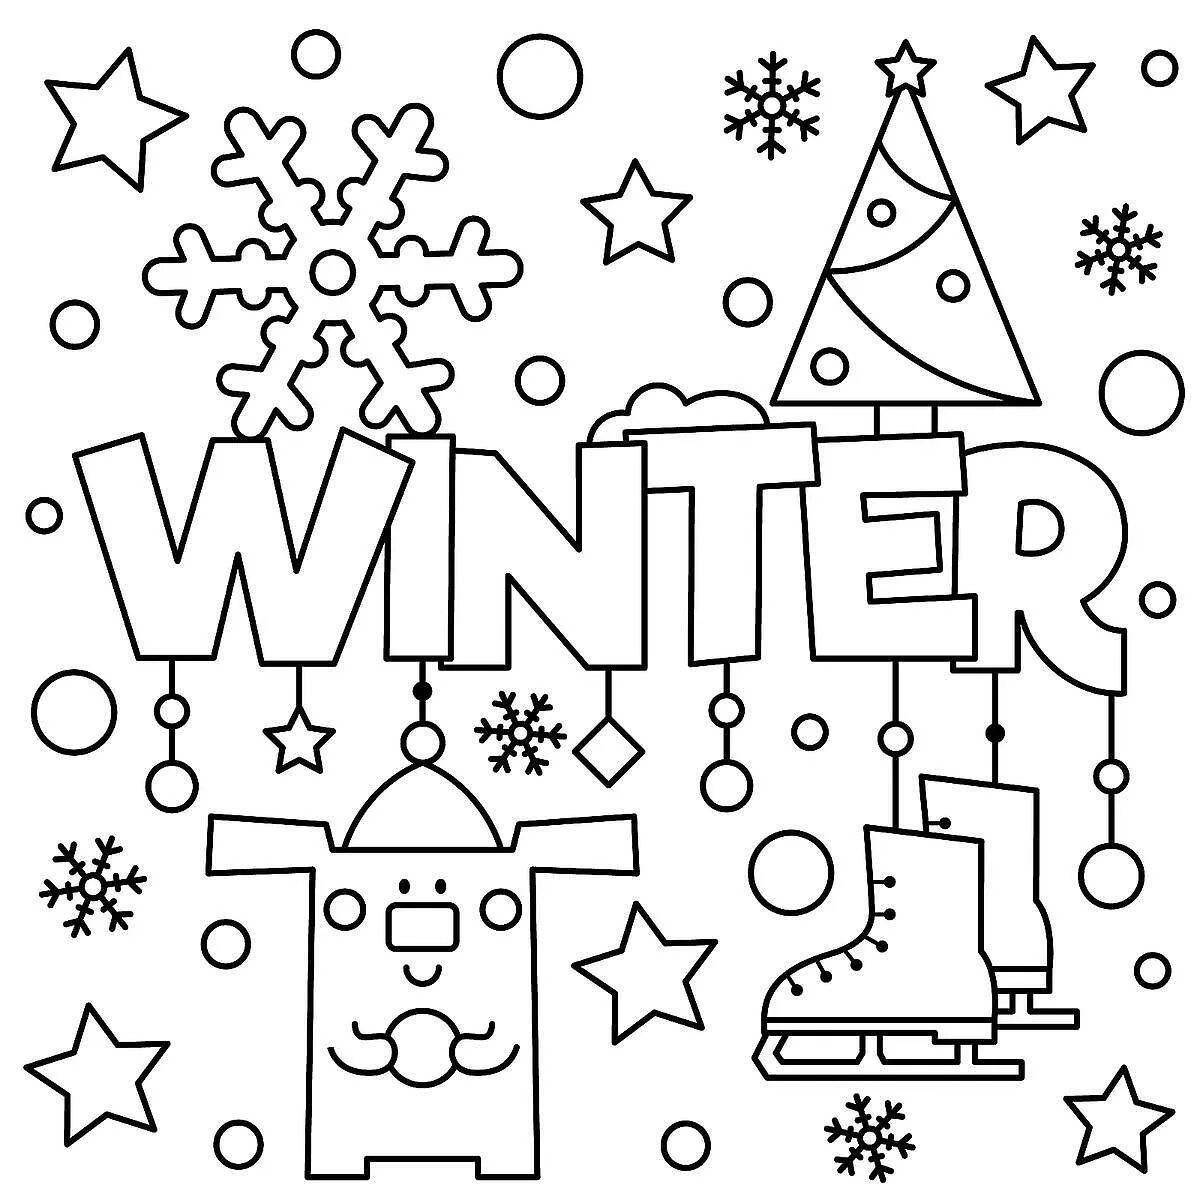 A playful December coloring book for kids